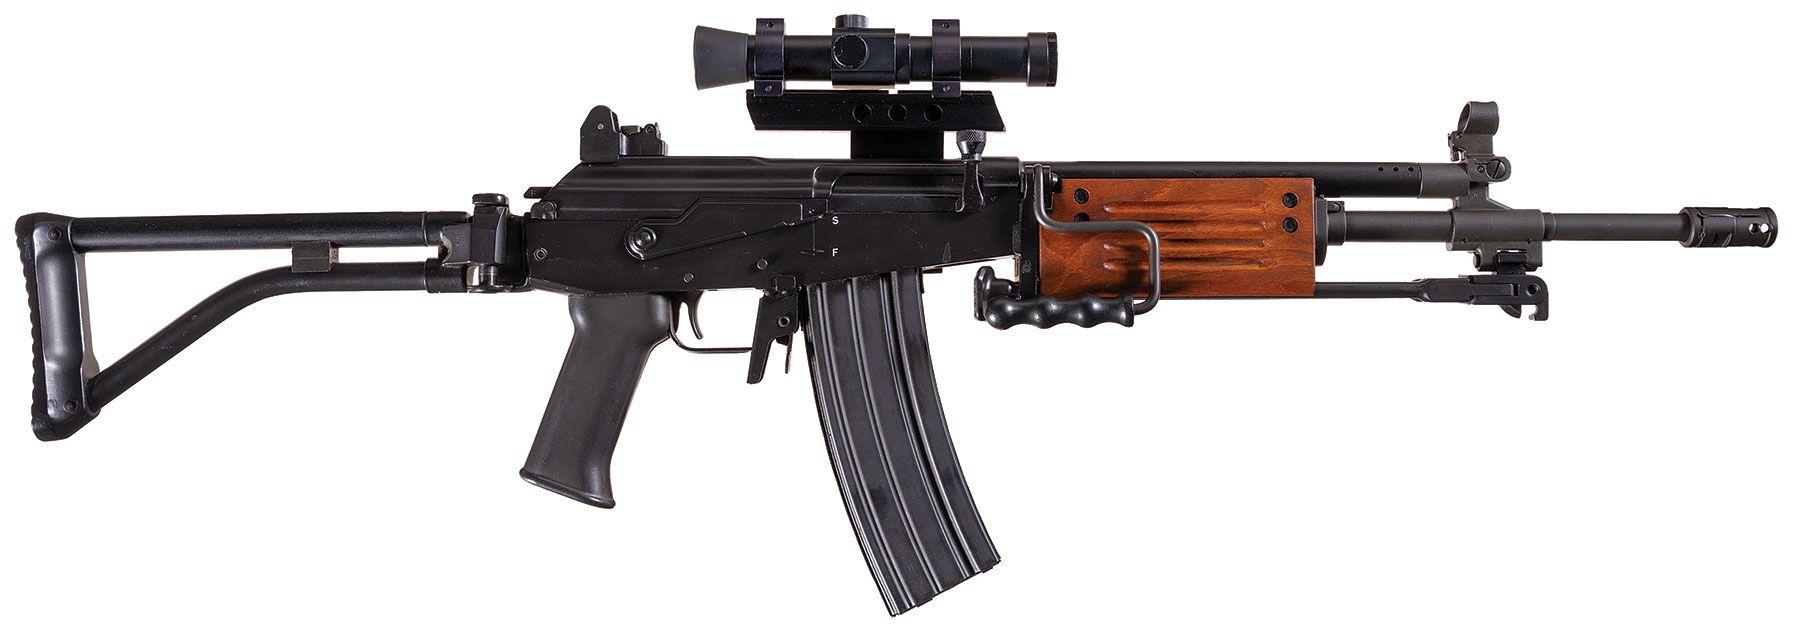 Action Arms/I.M.I. Model 392 Galil Semi-Automatic Rifle